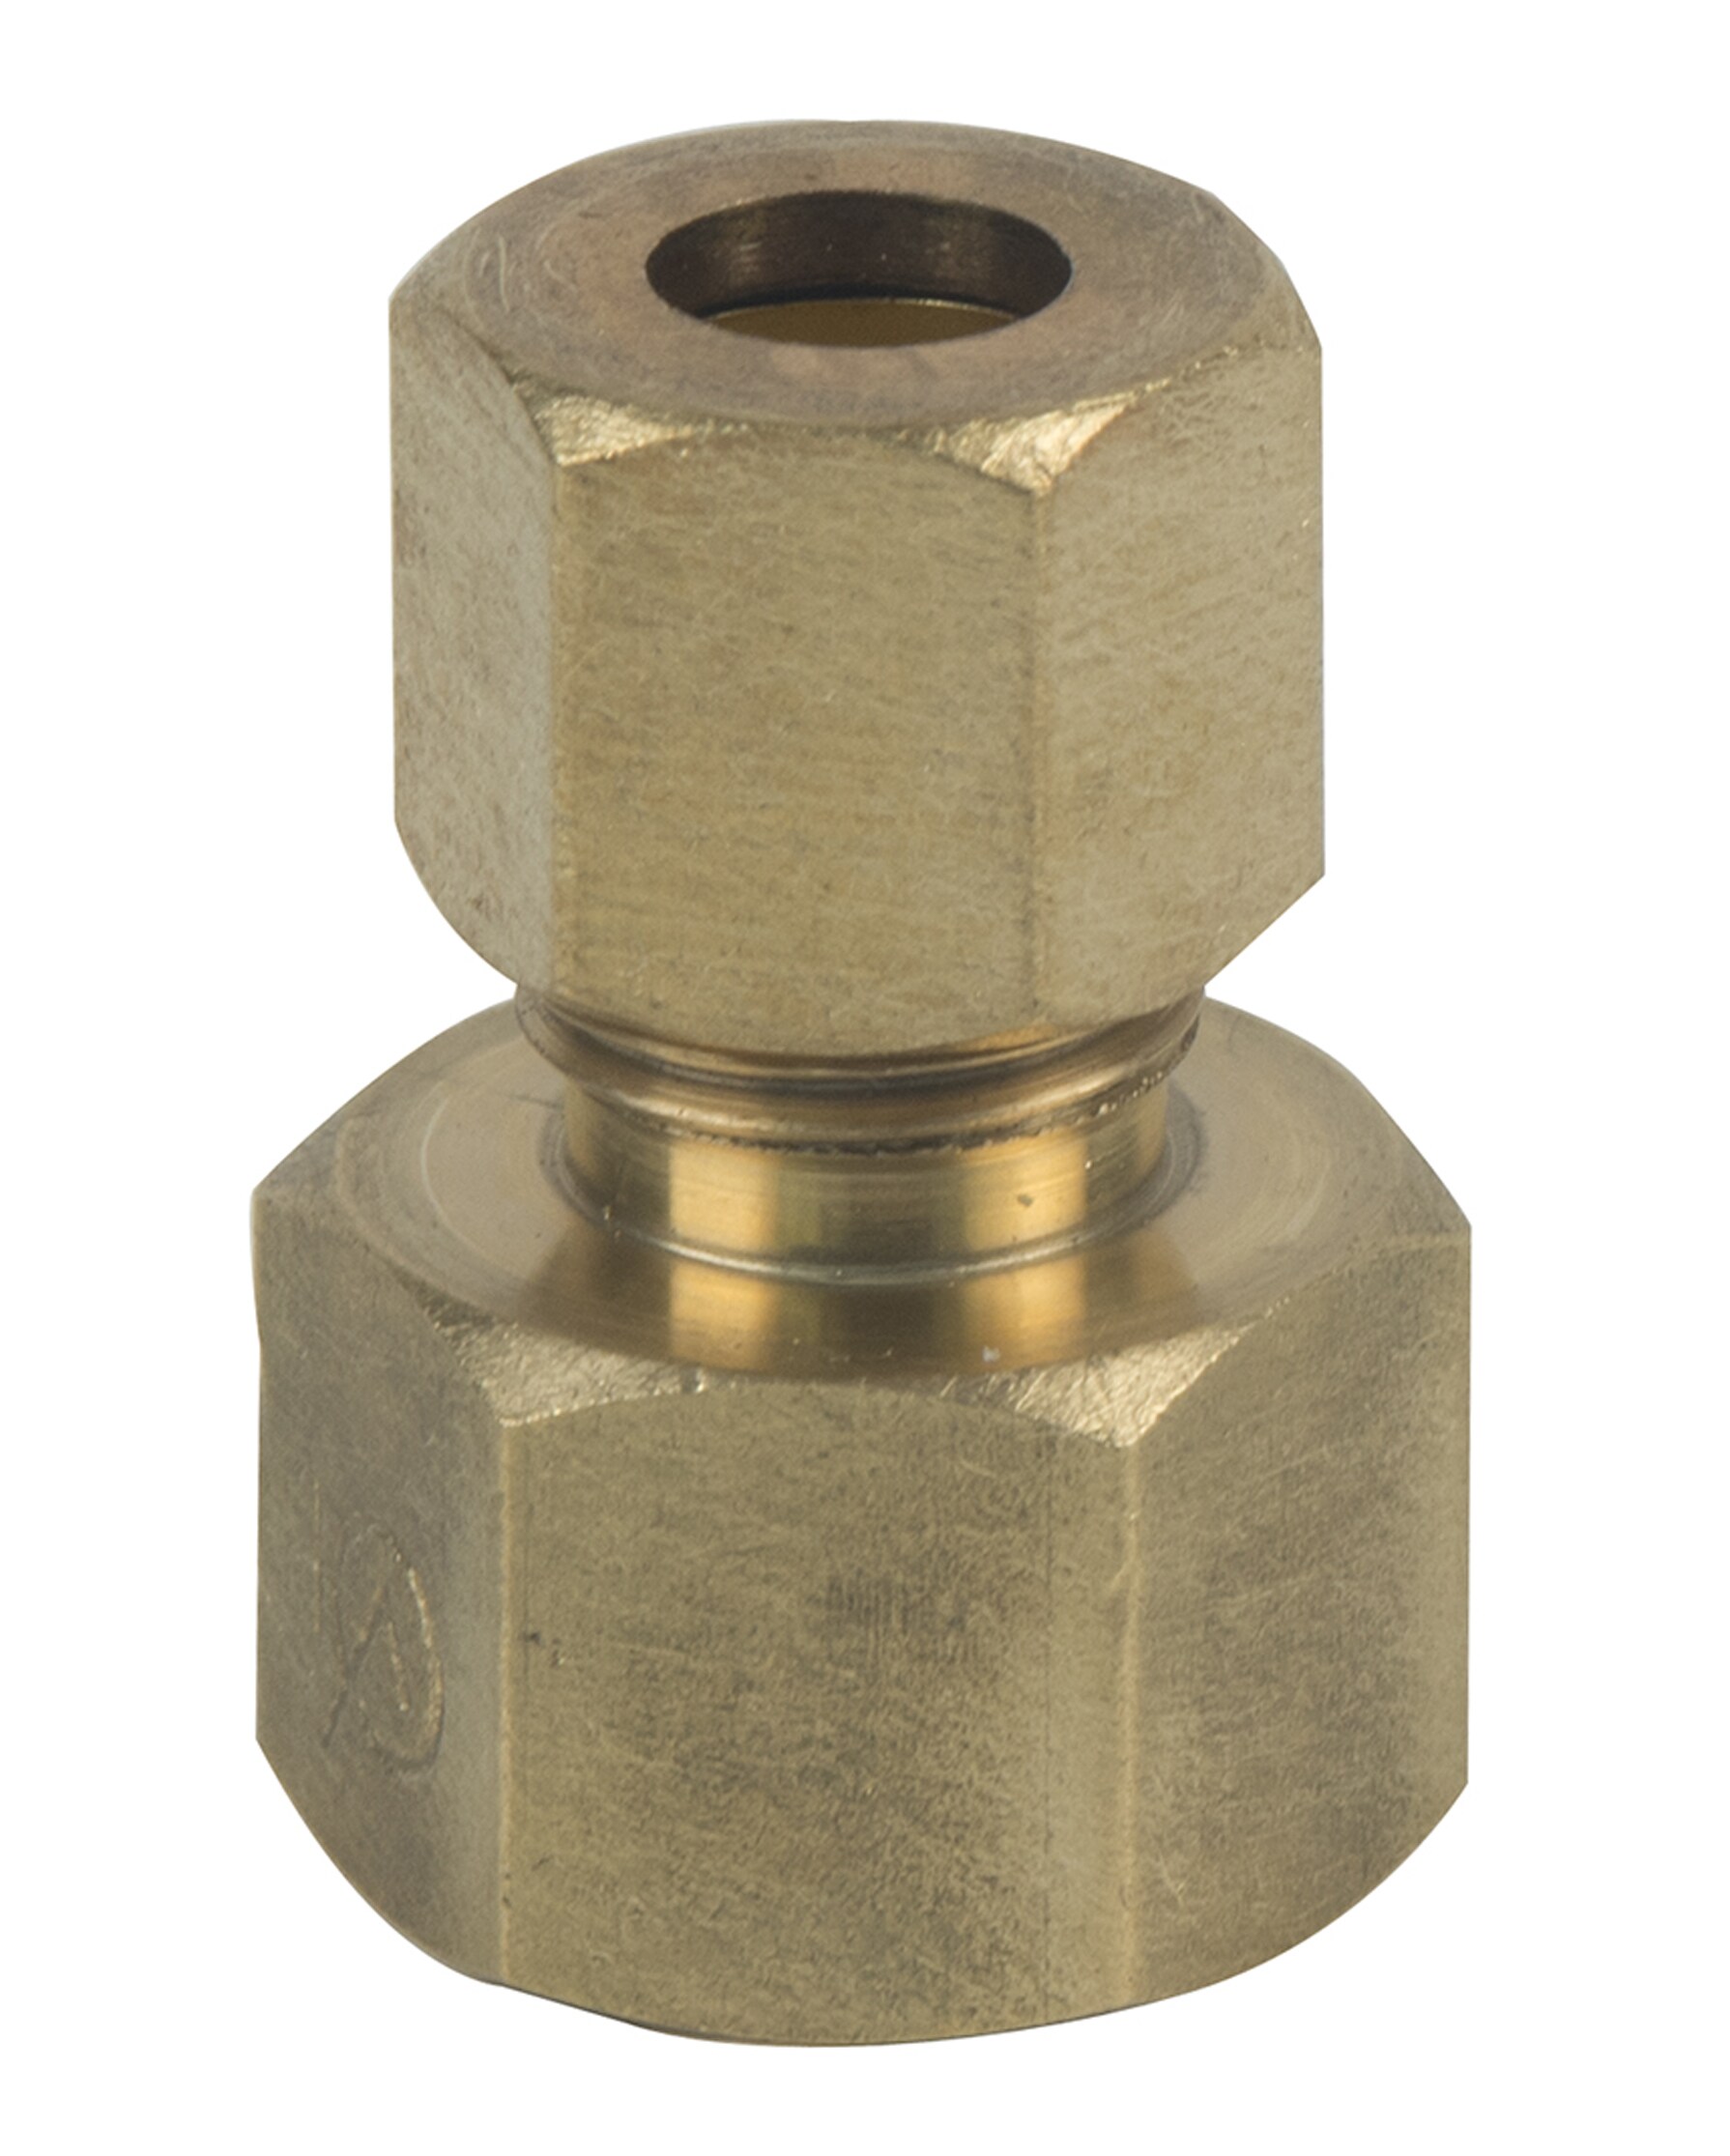 10MM OD X 3/8" OD REDUCING COUPLING 9-00748 WADE BRASS COMPRESSION FITTINGS 